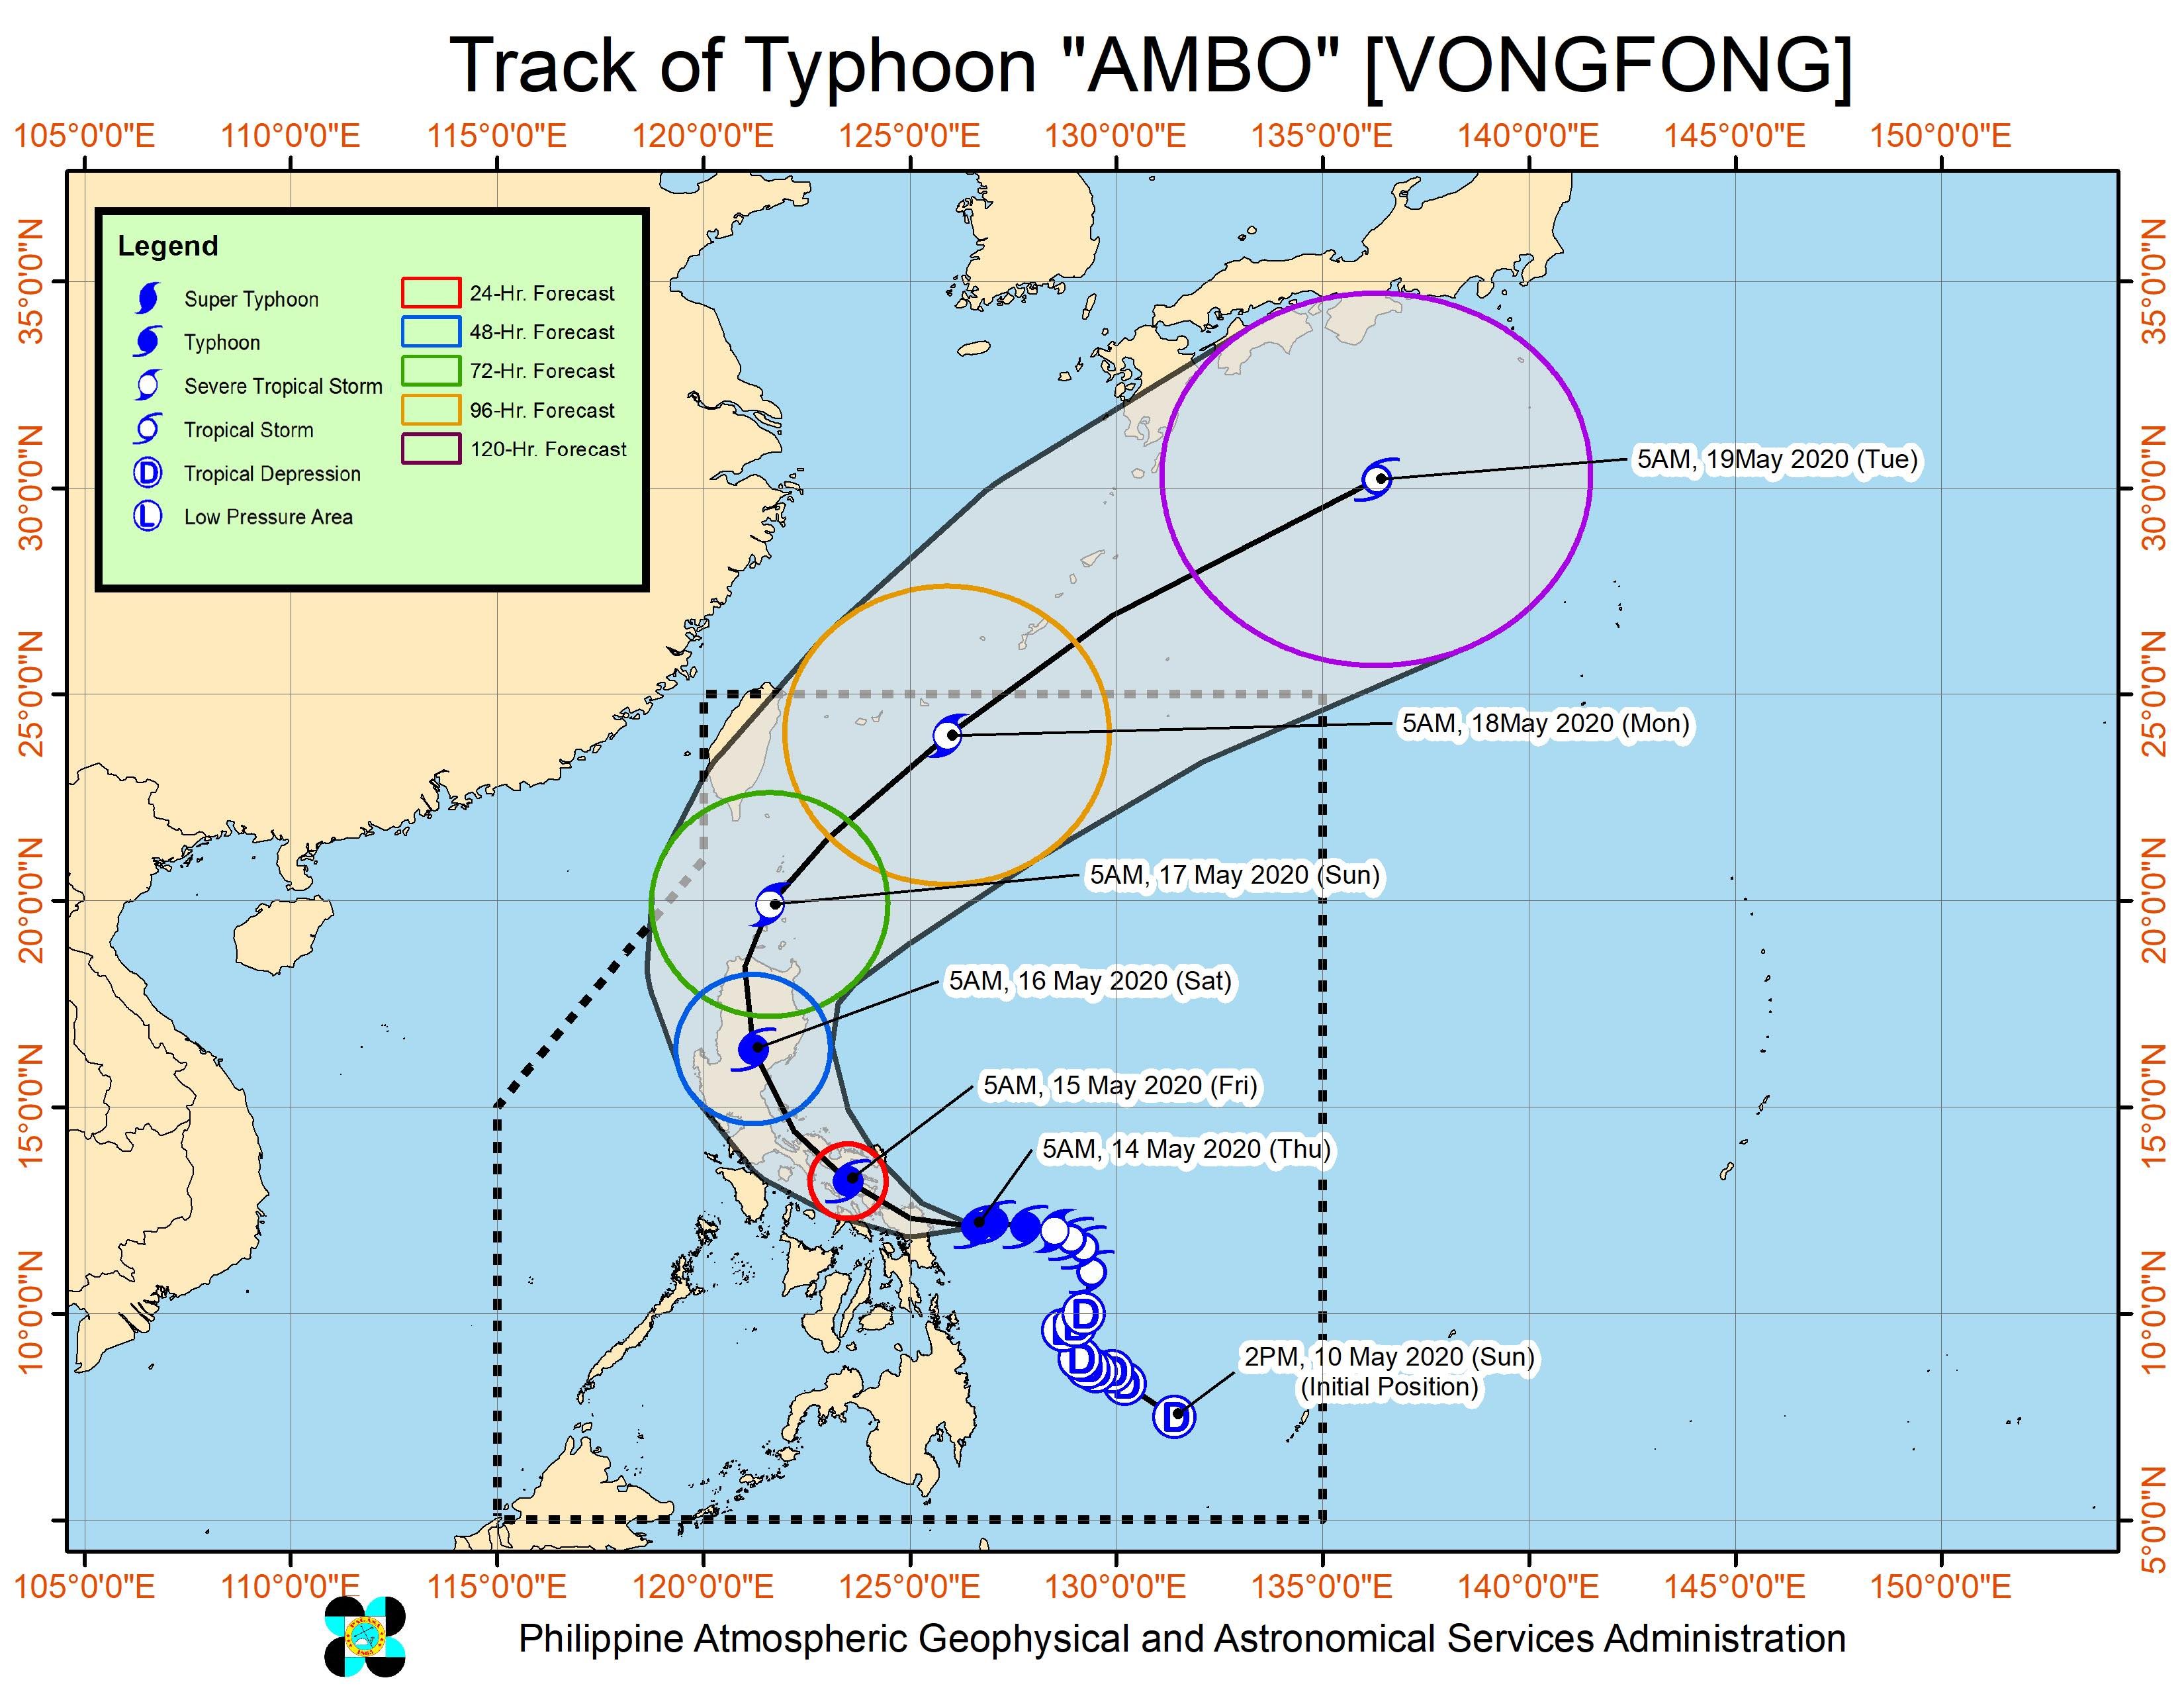 Forecast track of Typhoon Ambo (Vongfong) as of May 14, 2020, 8 am. Image from PAGASA 